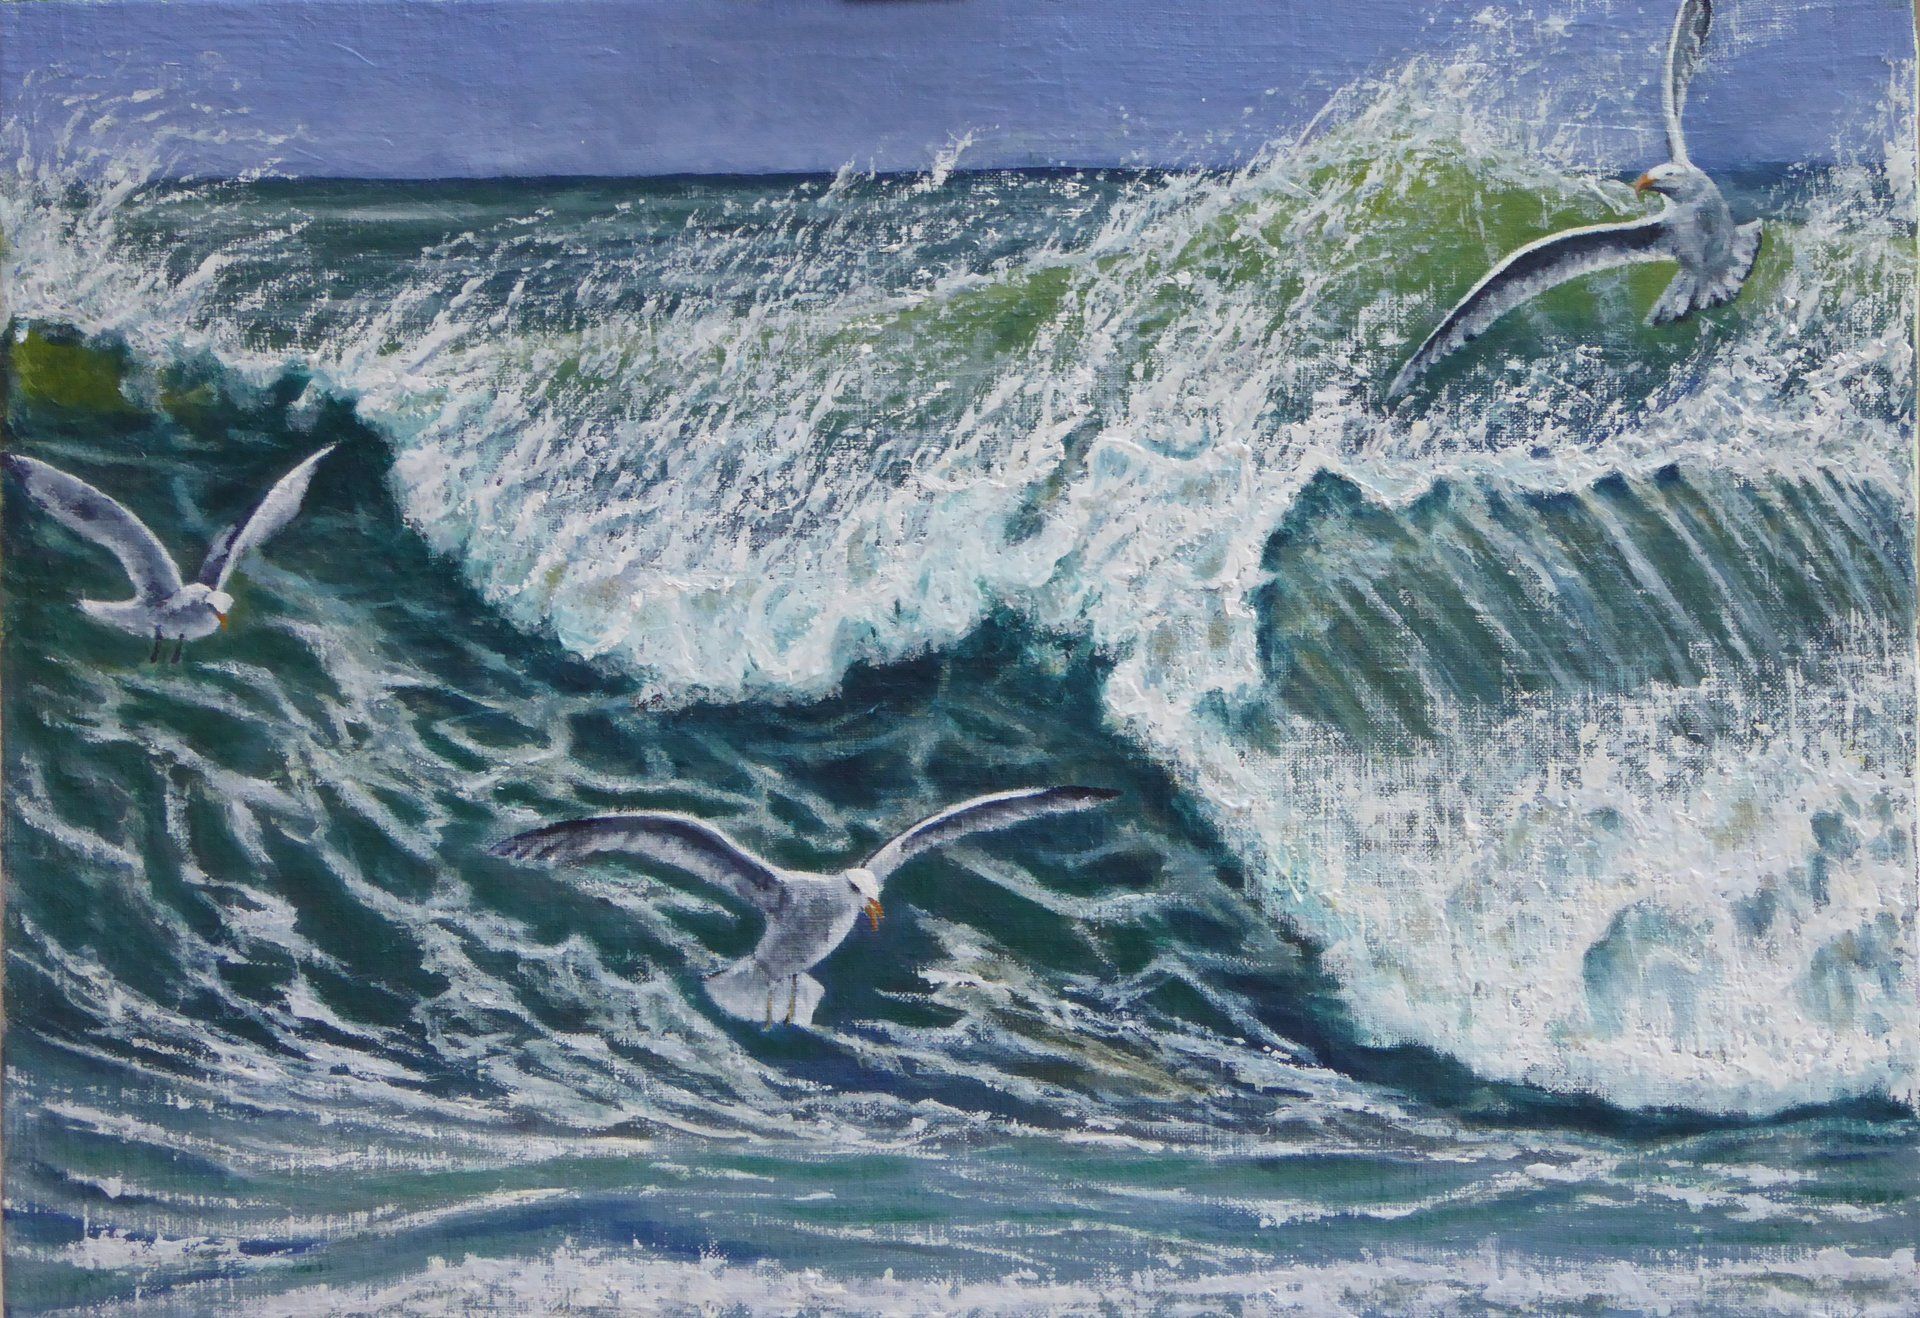 Painting of ocean wave. Seagulls Flying for Fish